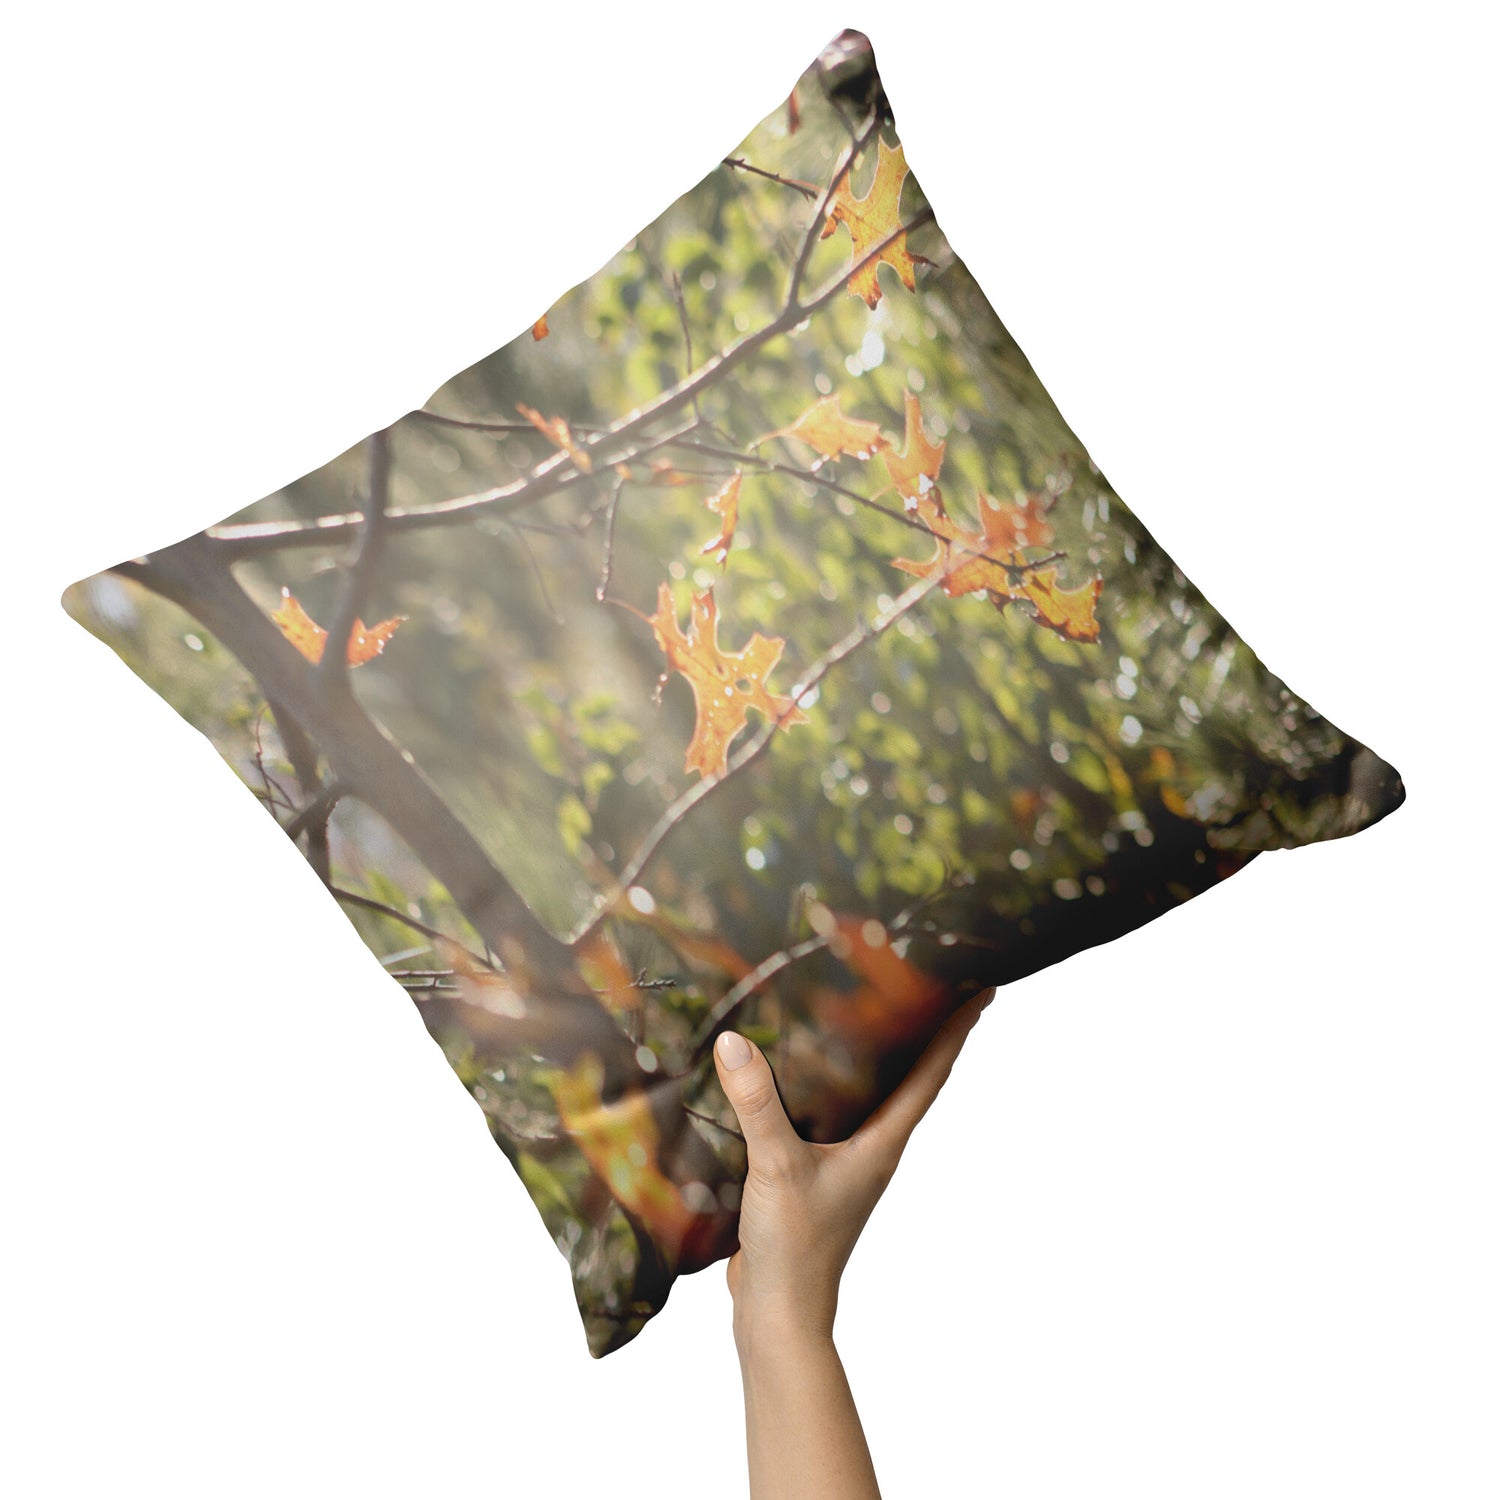 I Love Fall Y'all - Pillow Lettering - Signs and Seasons Gifts